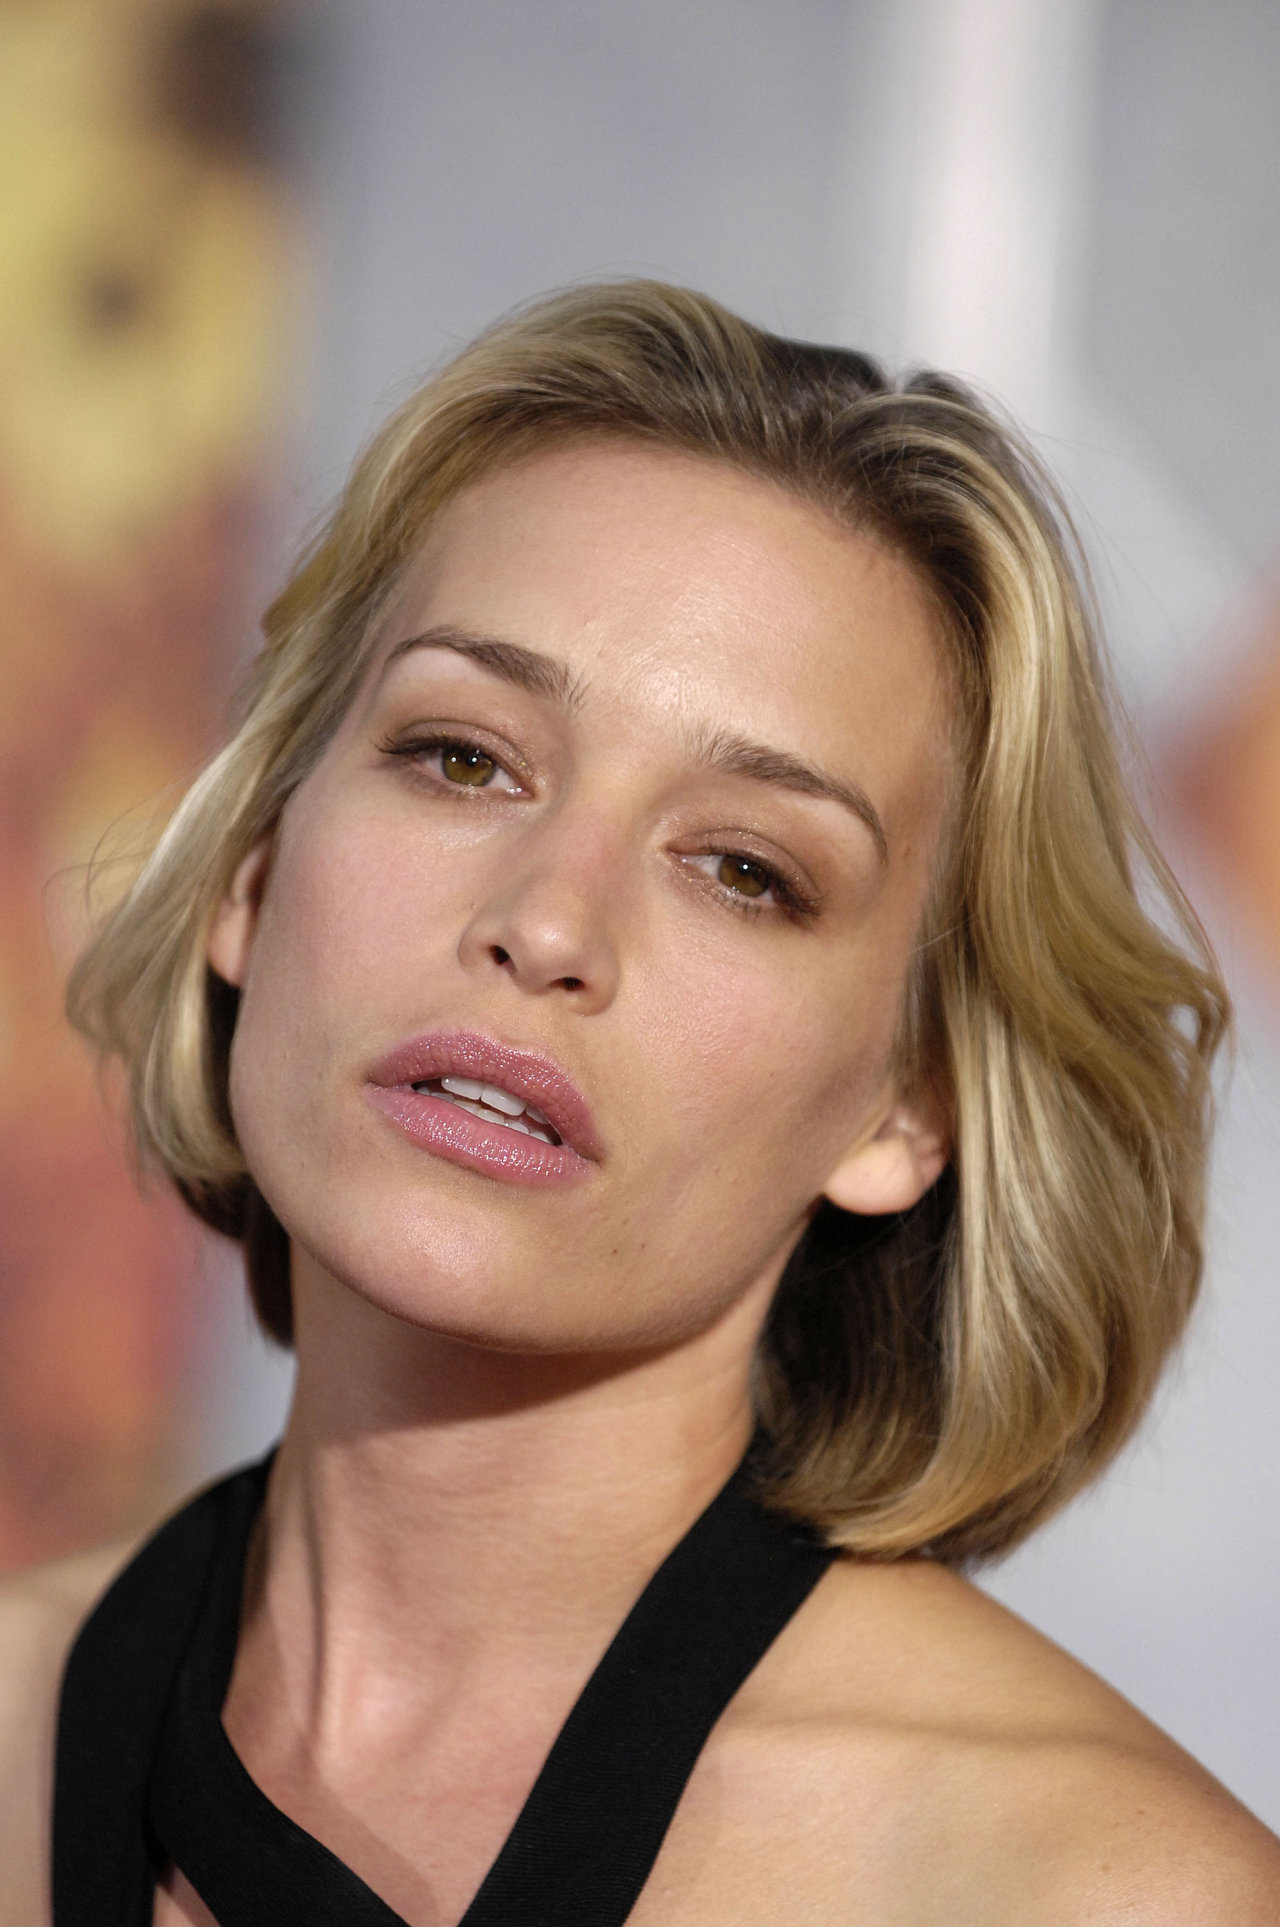 Celebrity Piper Perabo Photos. Pictures, wallpapers, Piper Perabo images (28069)1280 x 1927